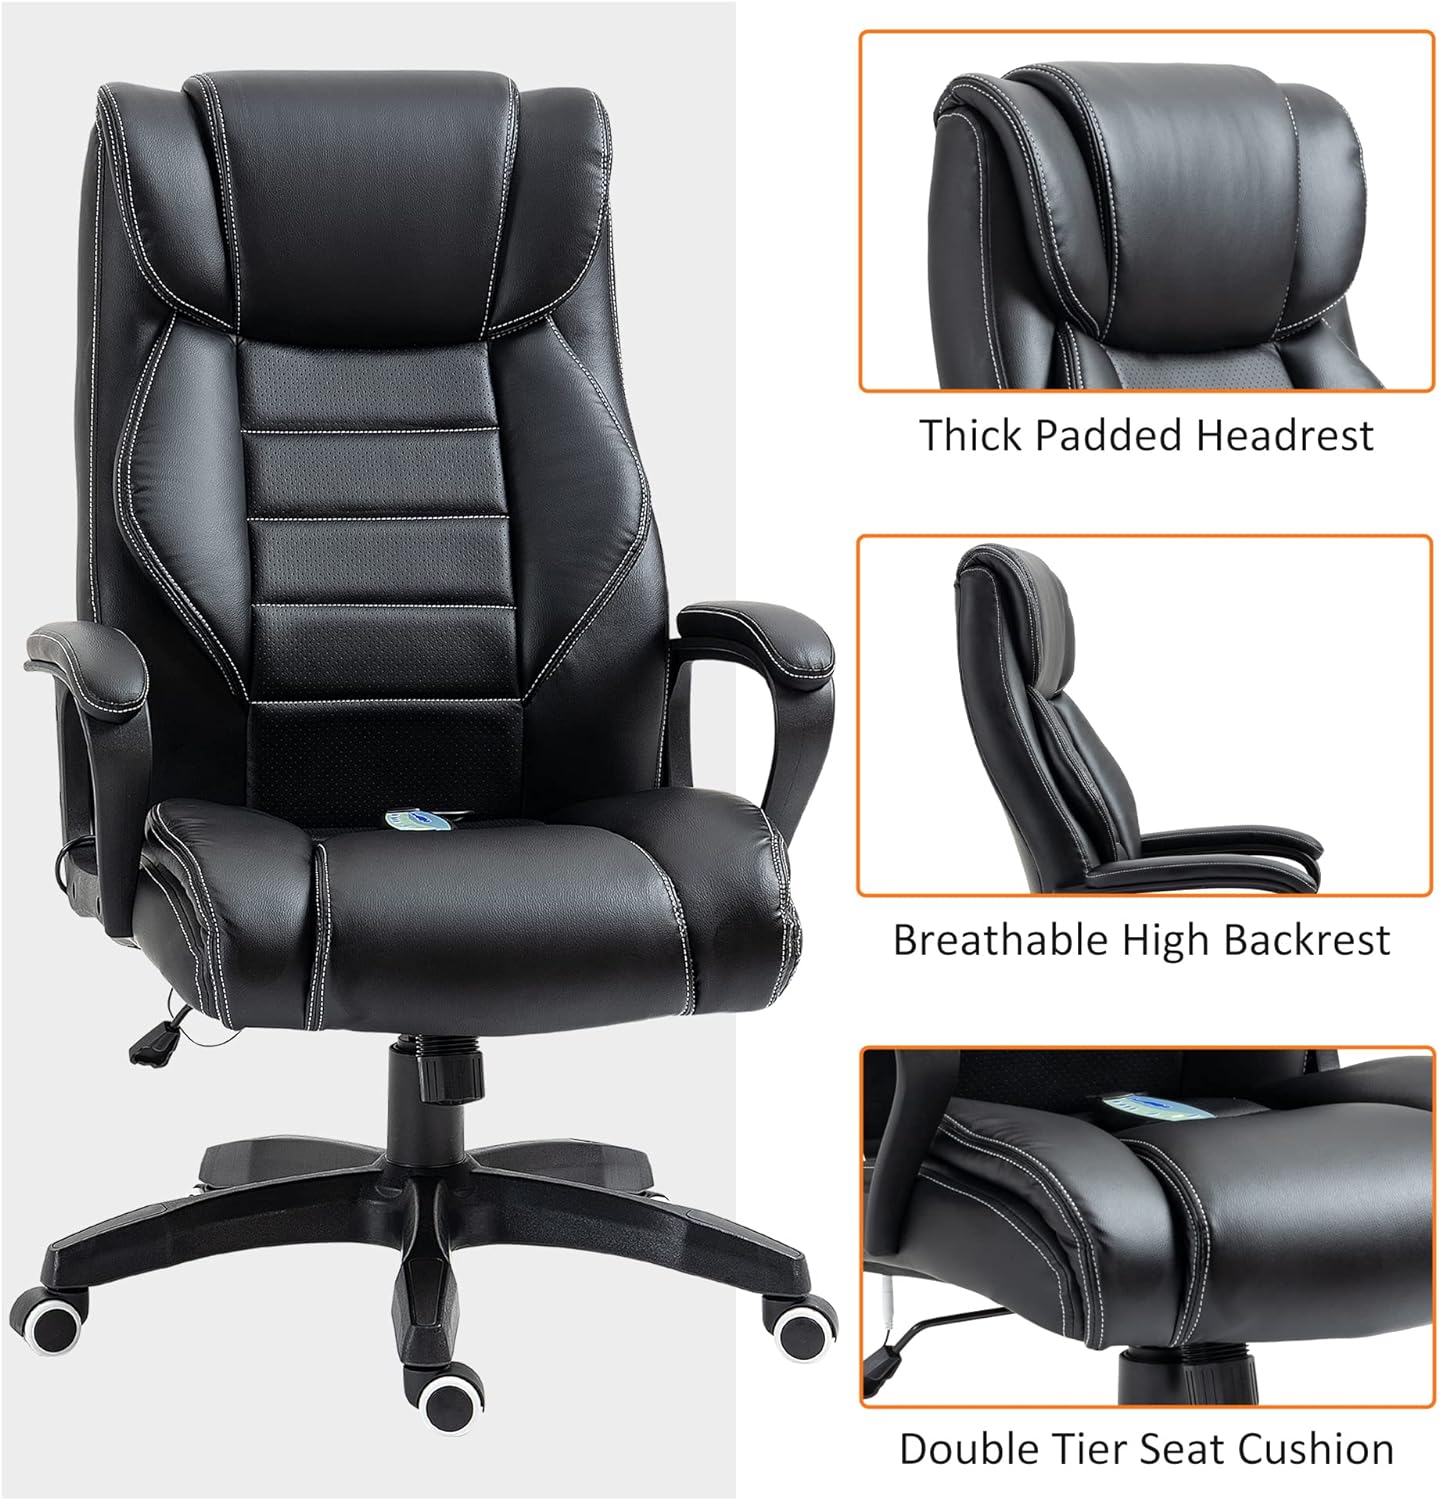 ProperAV Extra Ergonomic High Back Tilting Executive Office Chair with 6-Point Vibration Massage Function - maplin.co.uk